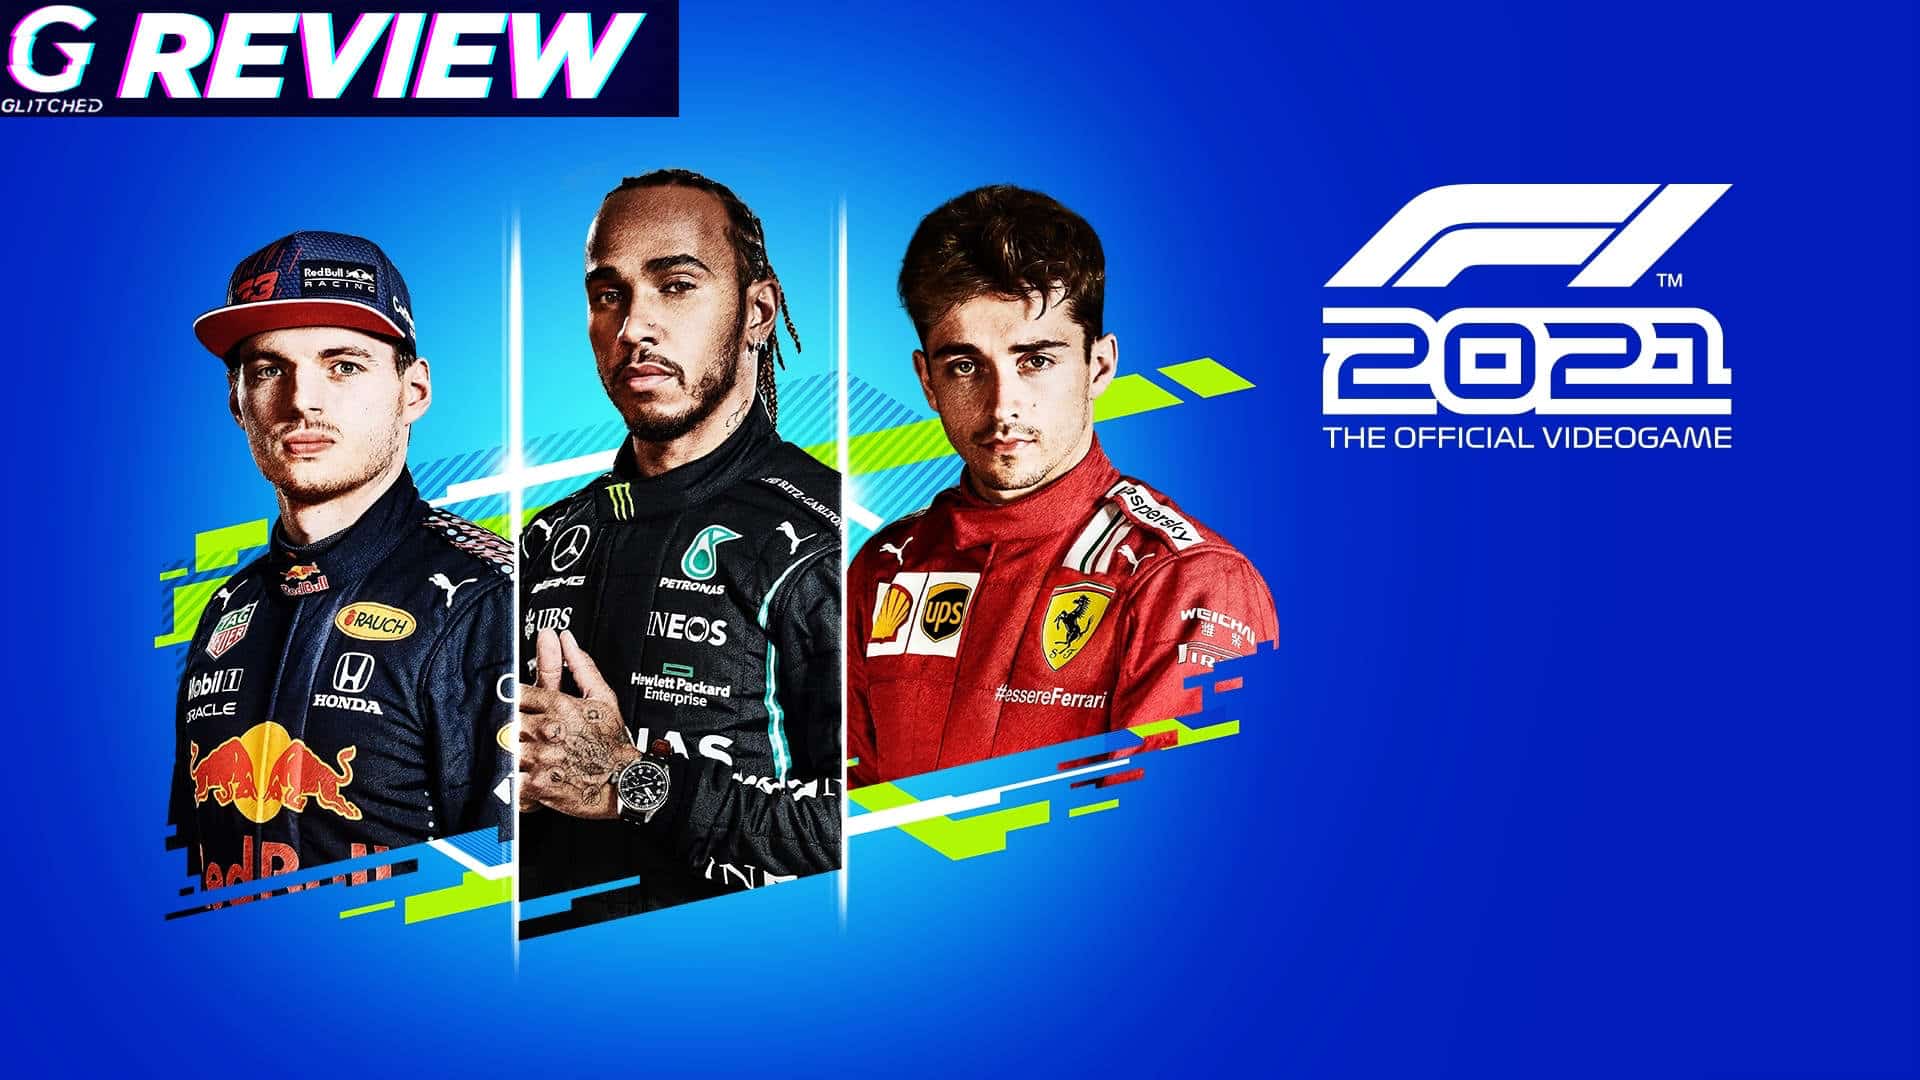 F1 2021 Review – The Next Generation of Racing is Here